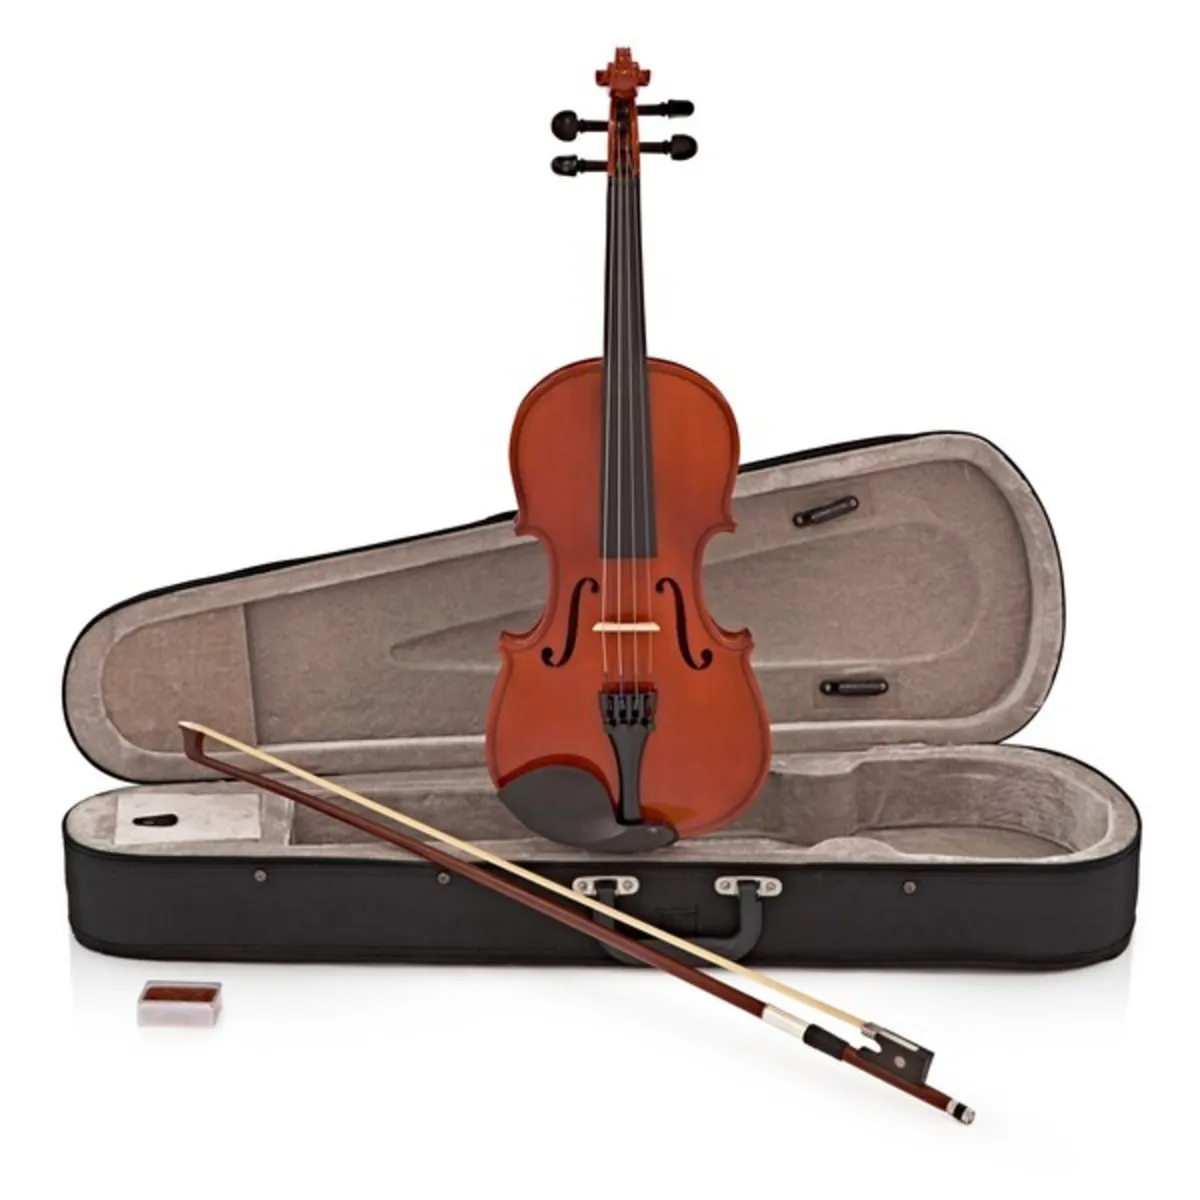 Violins / Fiddles - All sizes. New!